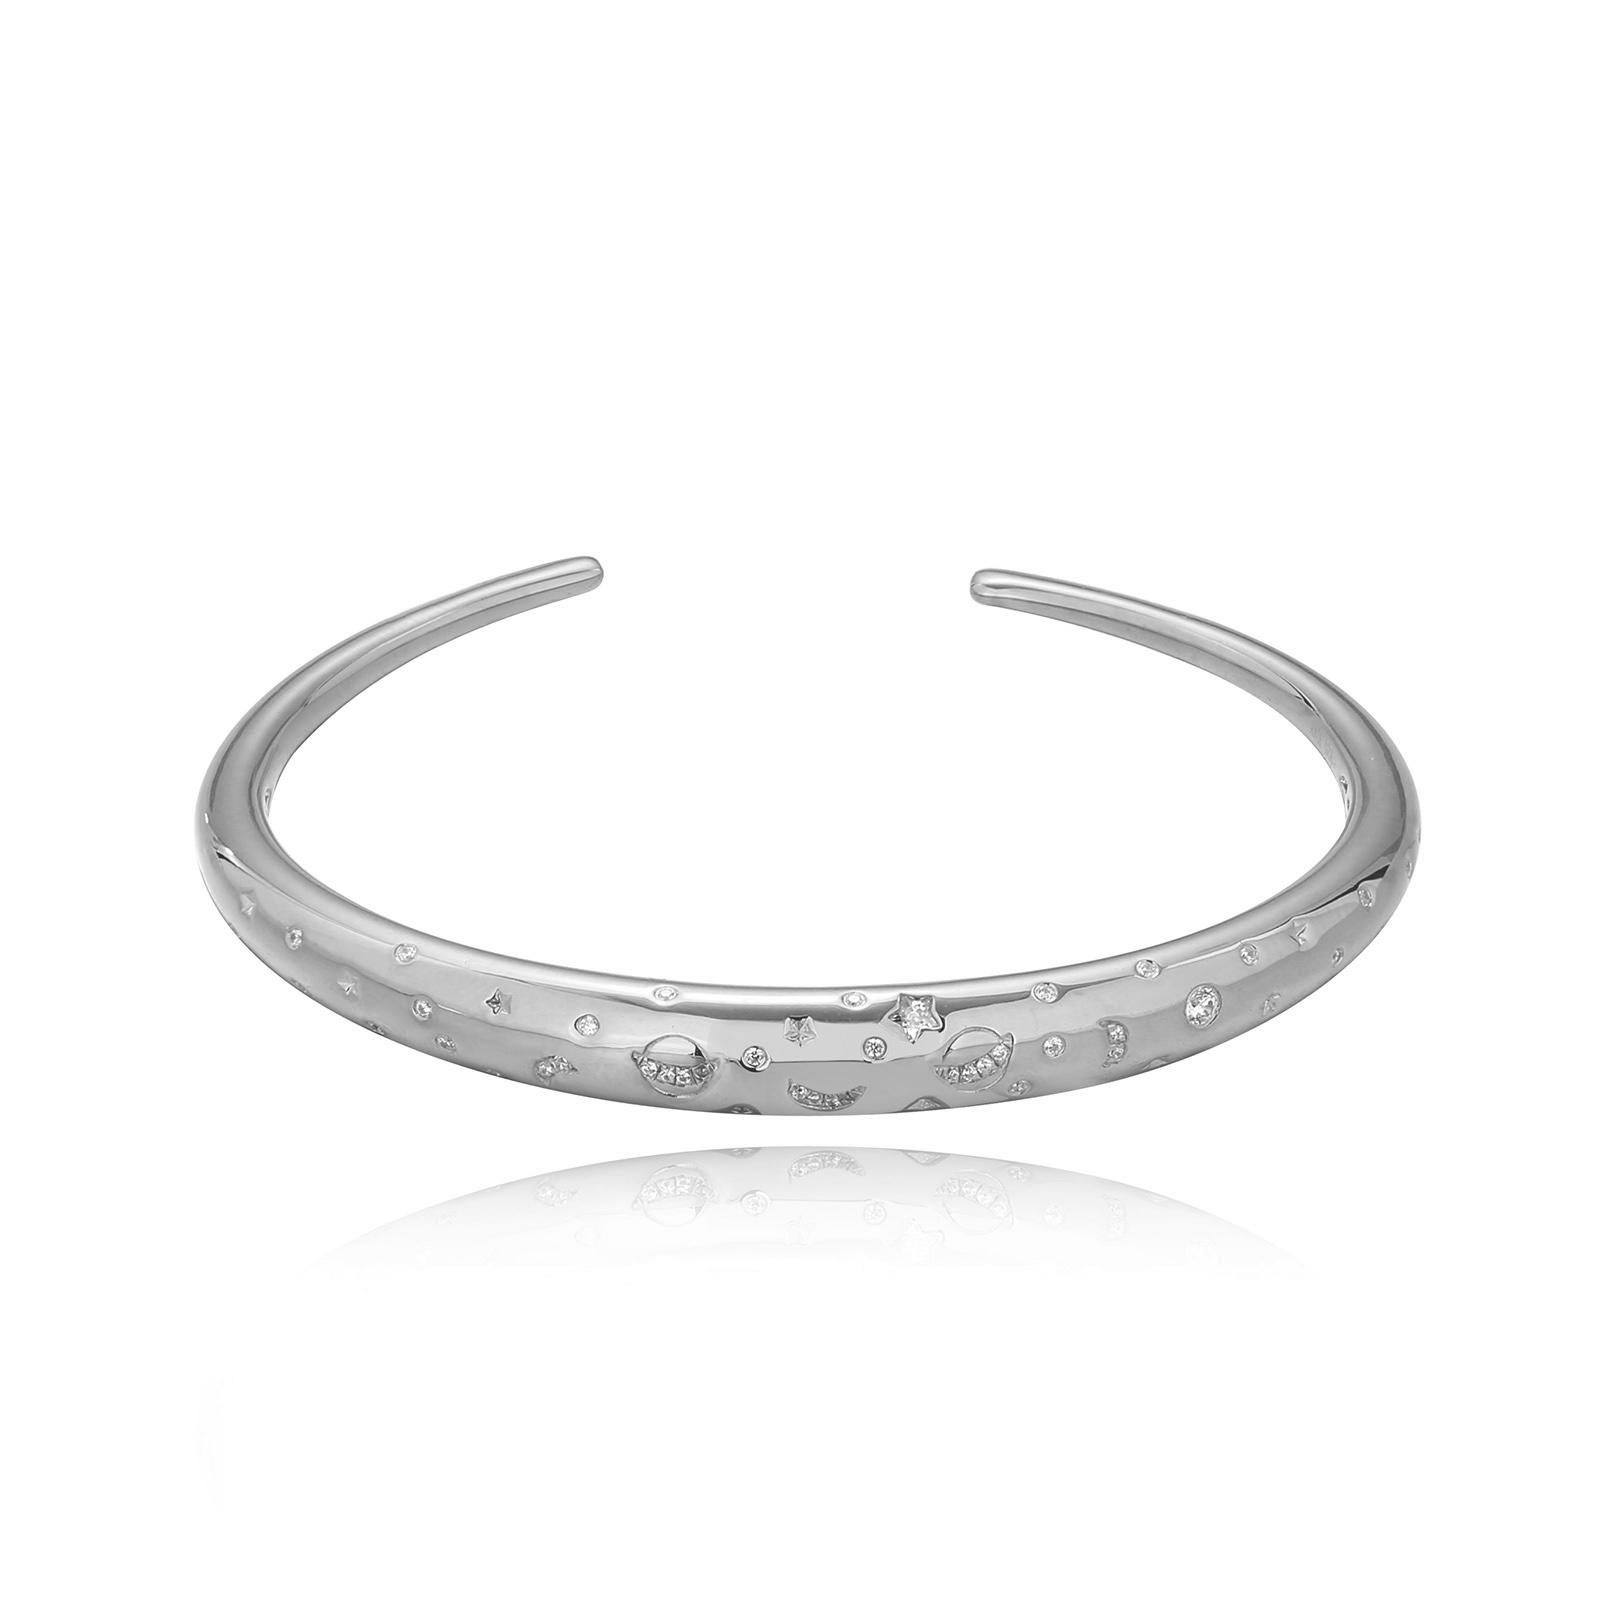 Even the starriest of us can be starstruck. This large, yet light-weight constellation dome cuff is a nod to the crystal clear night-time sky when you can see the stars and the moon abounding ... and even Jupiter. .925 sterling silver base. Also